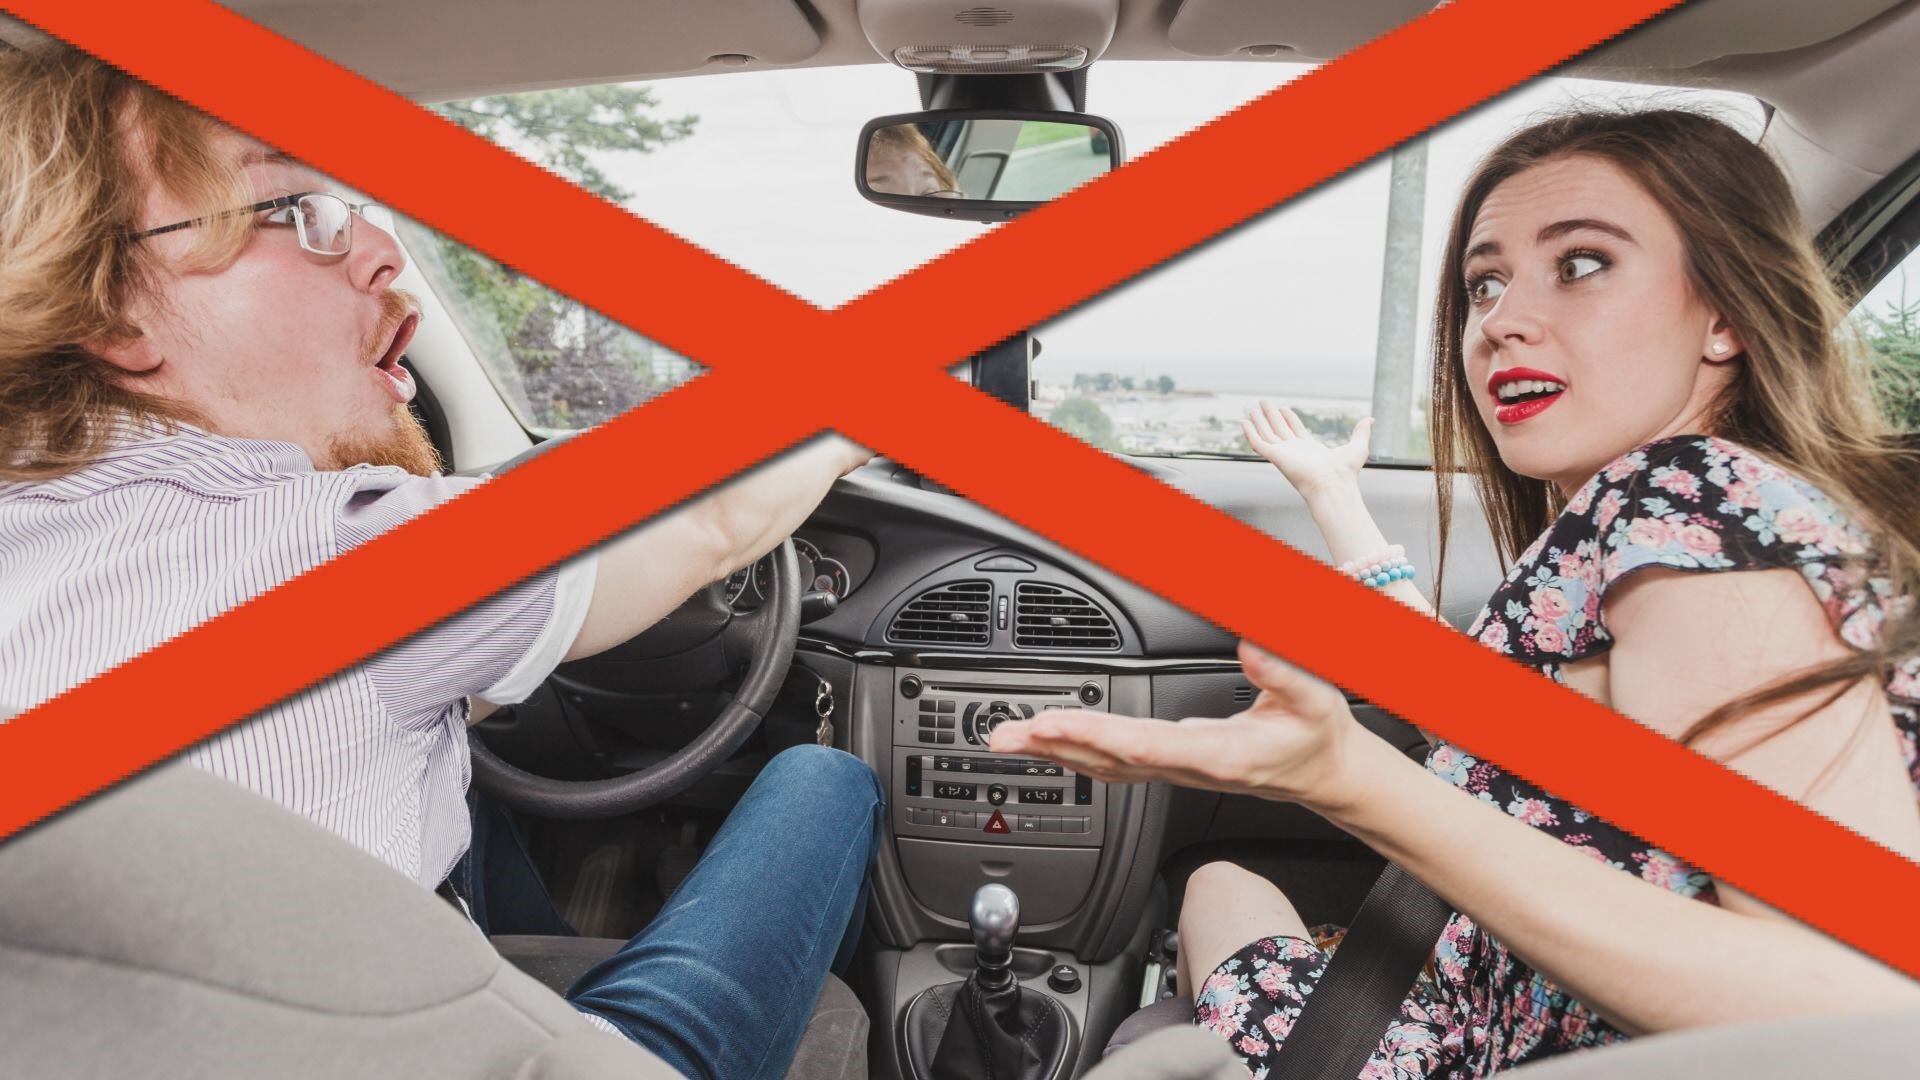 You're not alone! Seven out of 10 couples fight in the car at least once a month. Here's how to avoid an argument...